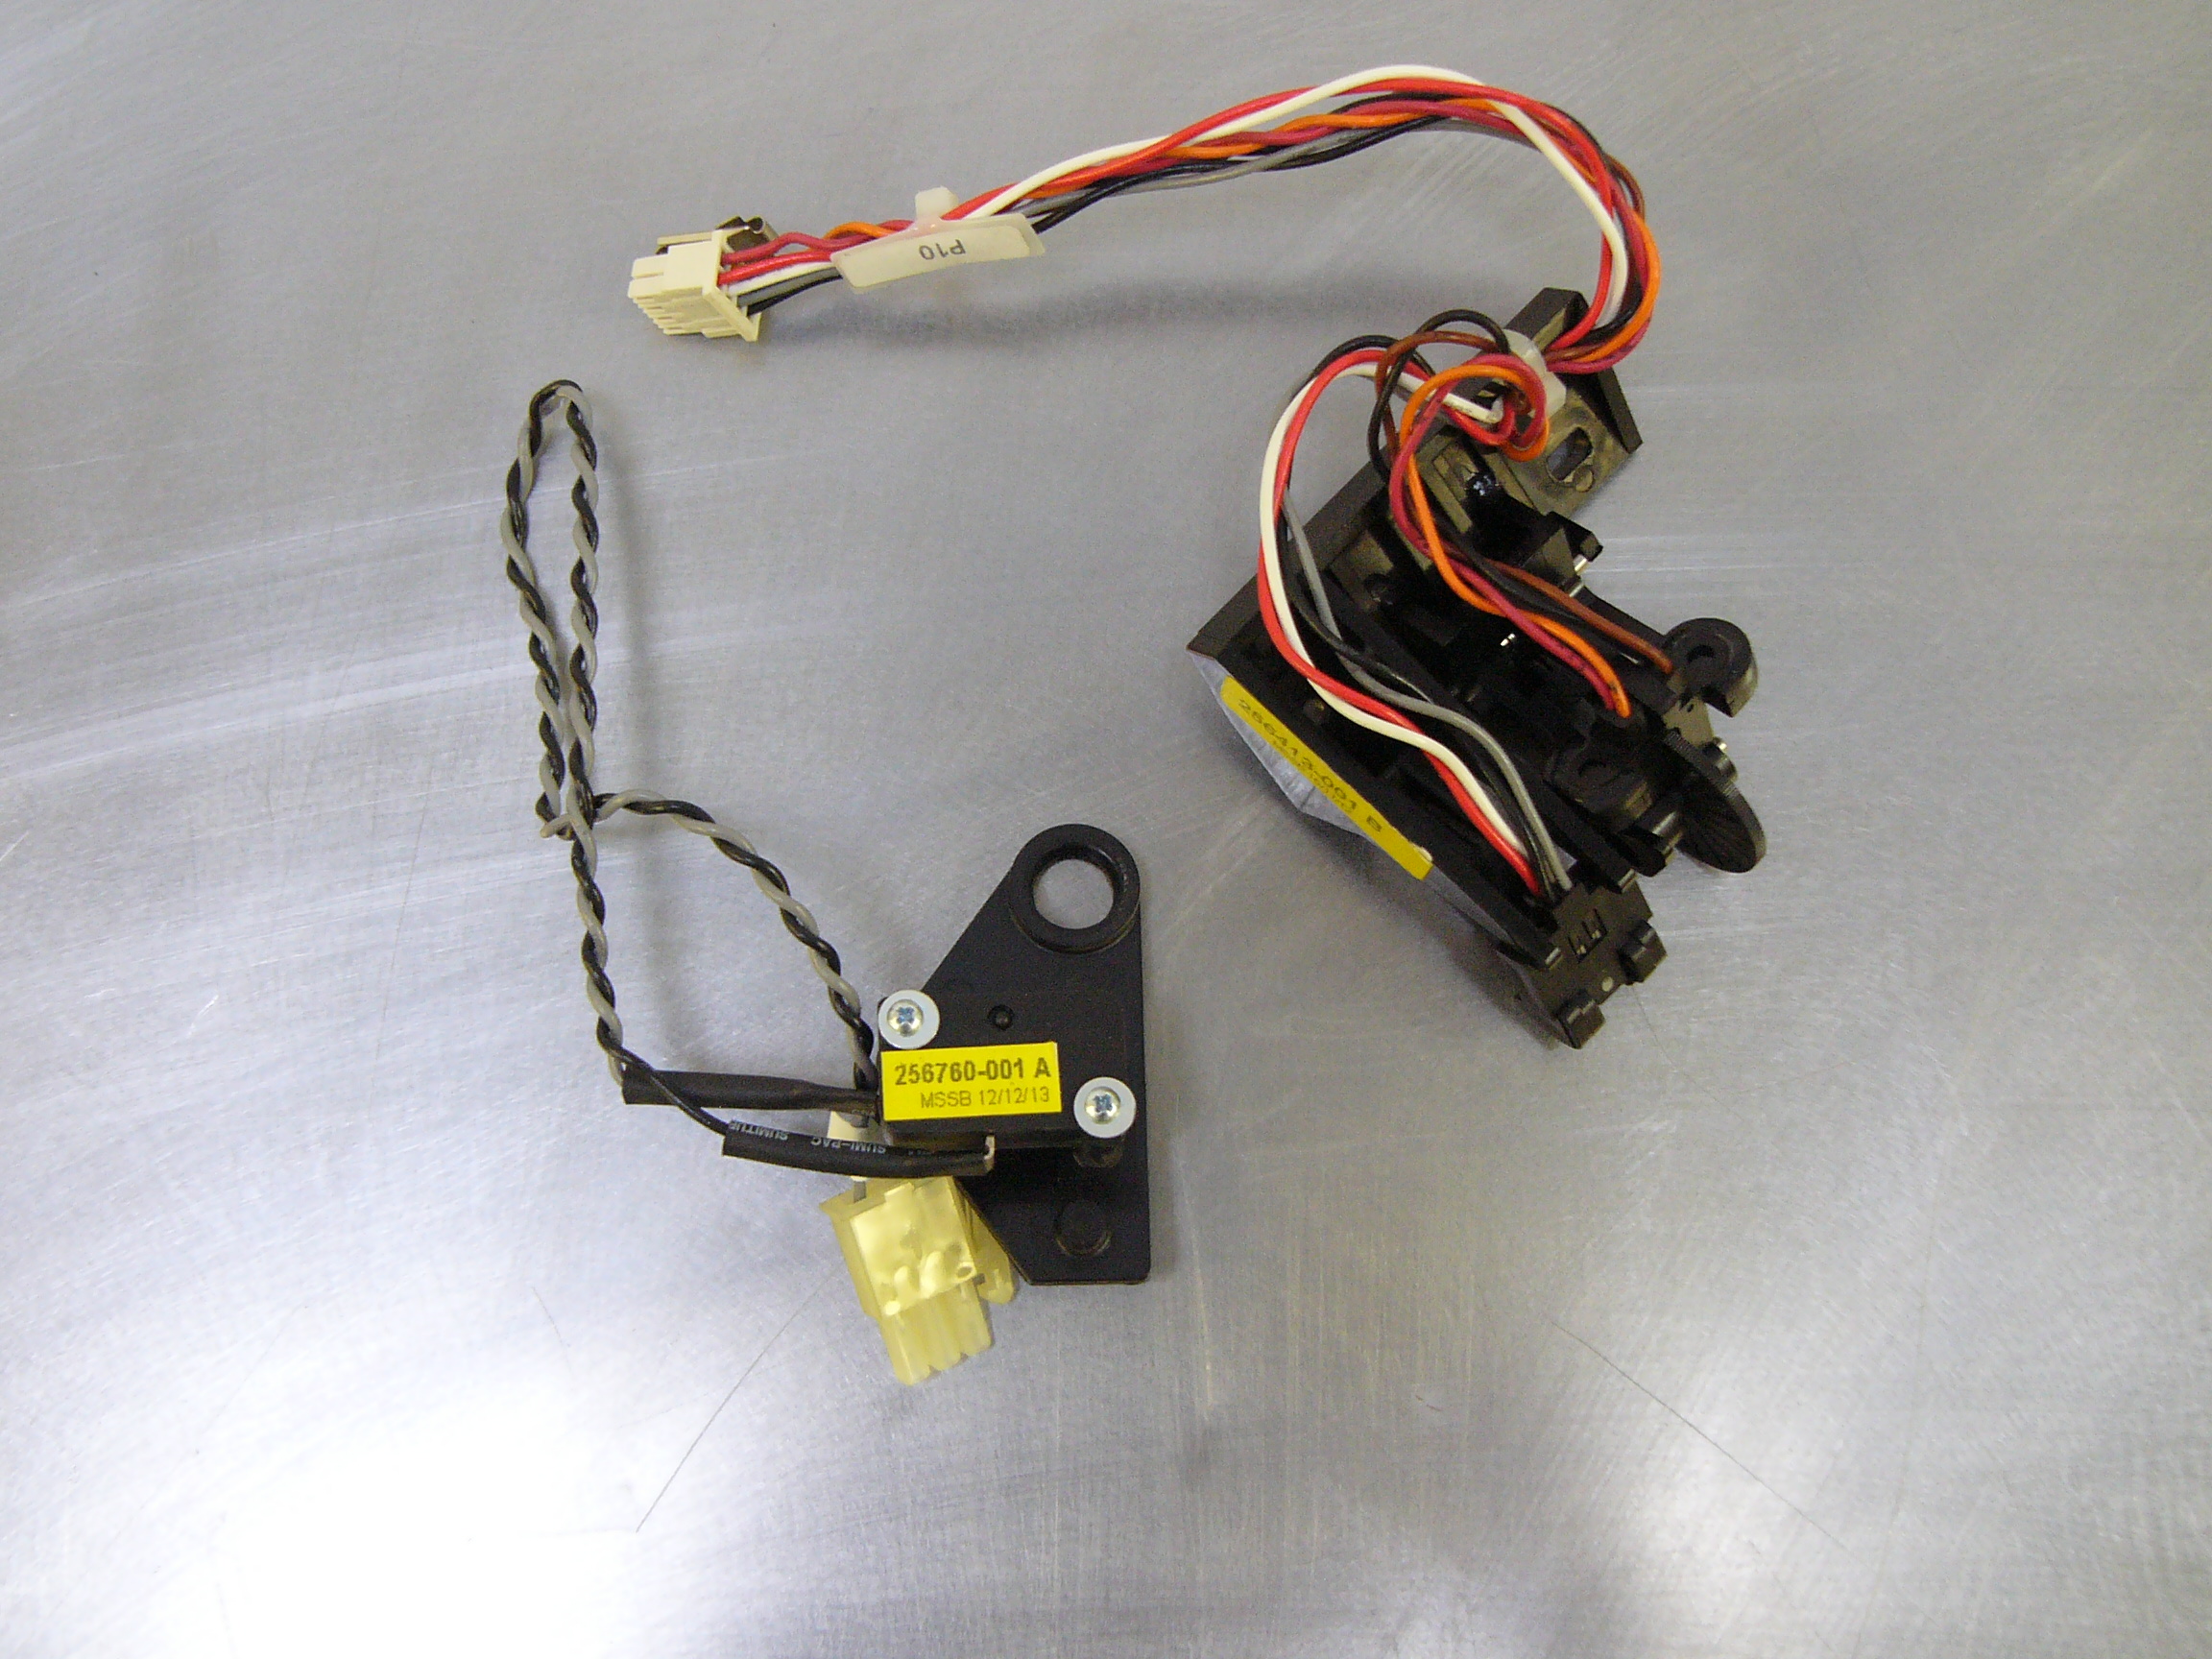 257653-901 -  - Spare Part Switch Assy, Platen Open/Paper Detect Field Kit